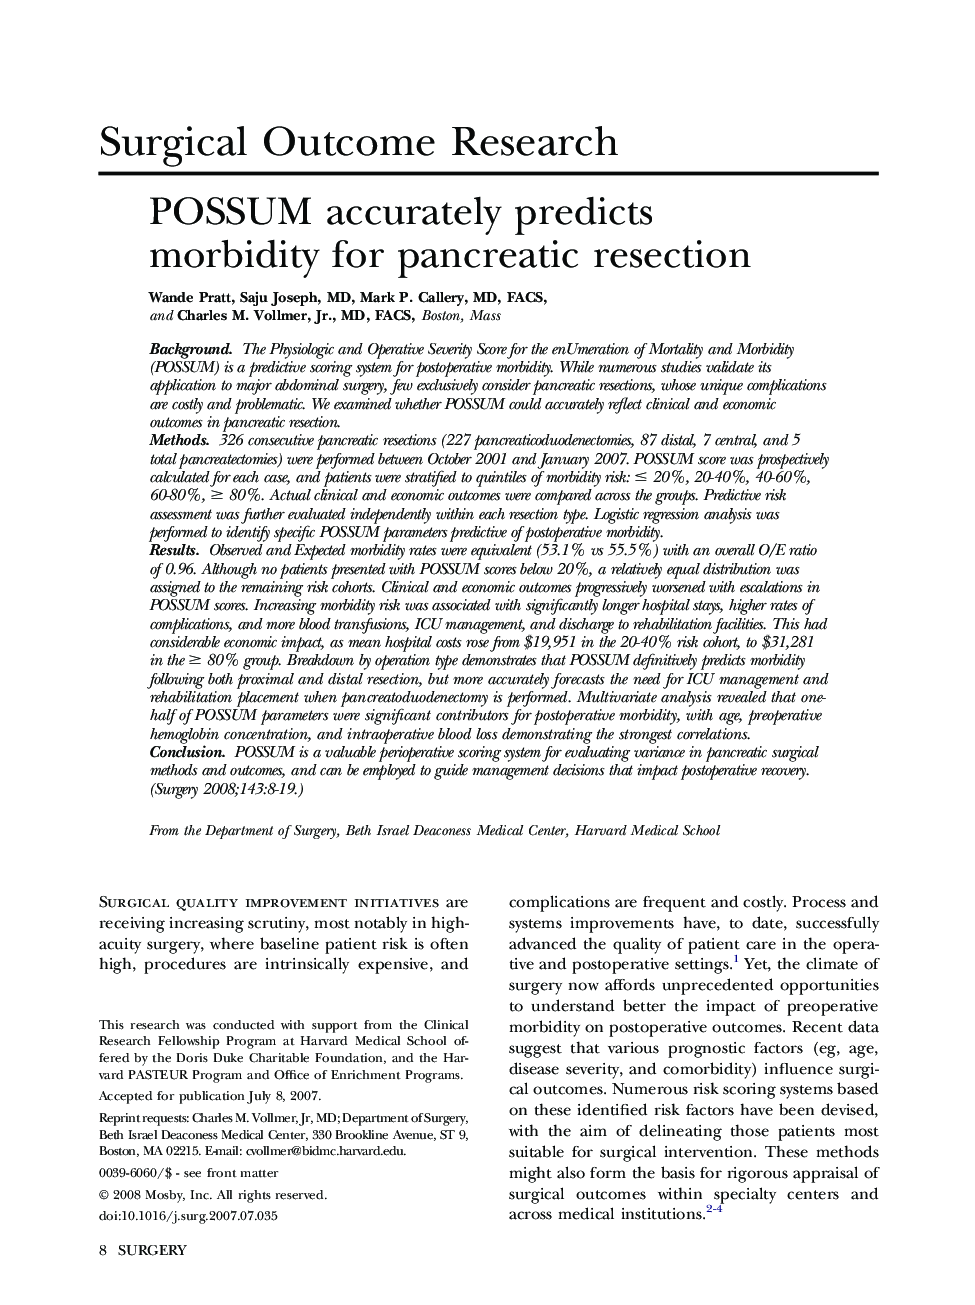 POSSUM accurately predicts morbidity for pancreatic resection 